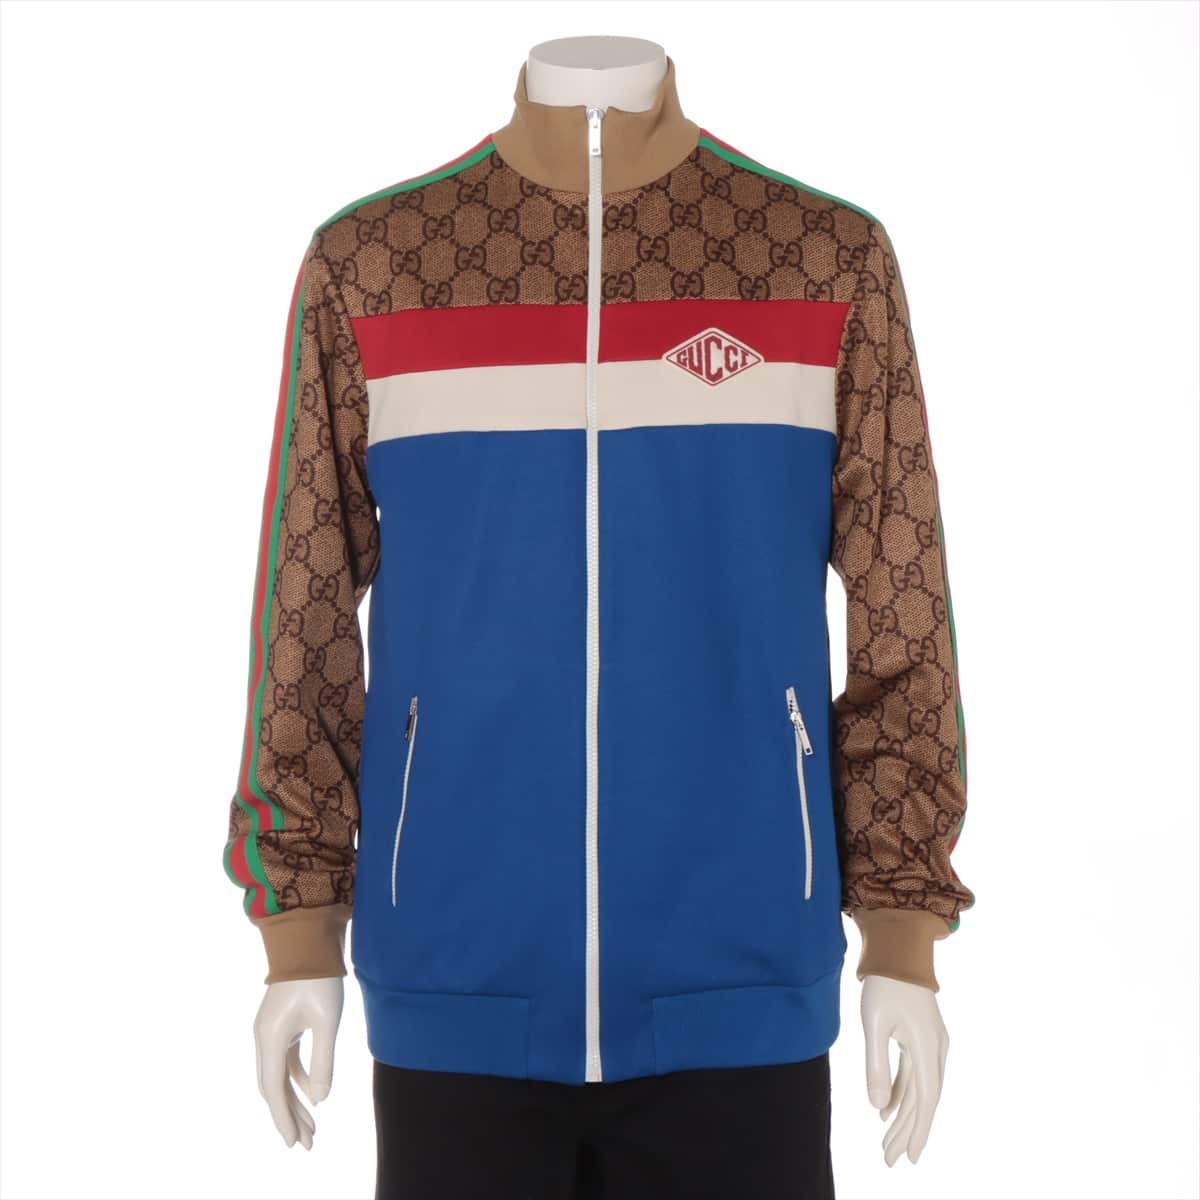 Gucci 18AW Cotton & Polyester Jacket L Unisex blue x brown  526524 GG technical jersey